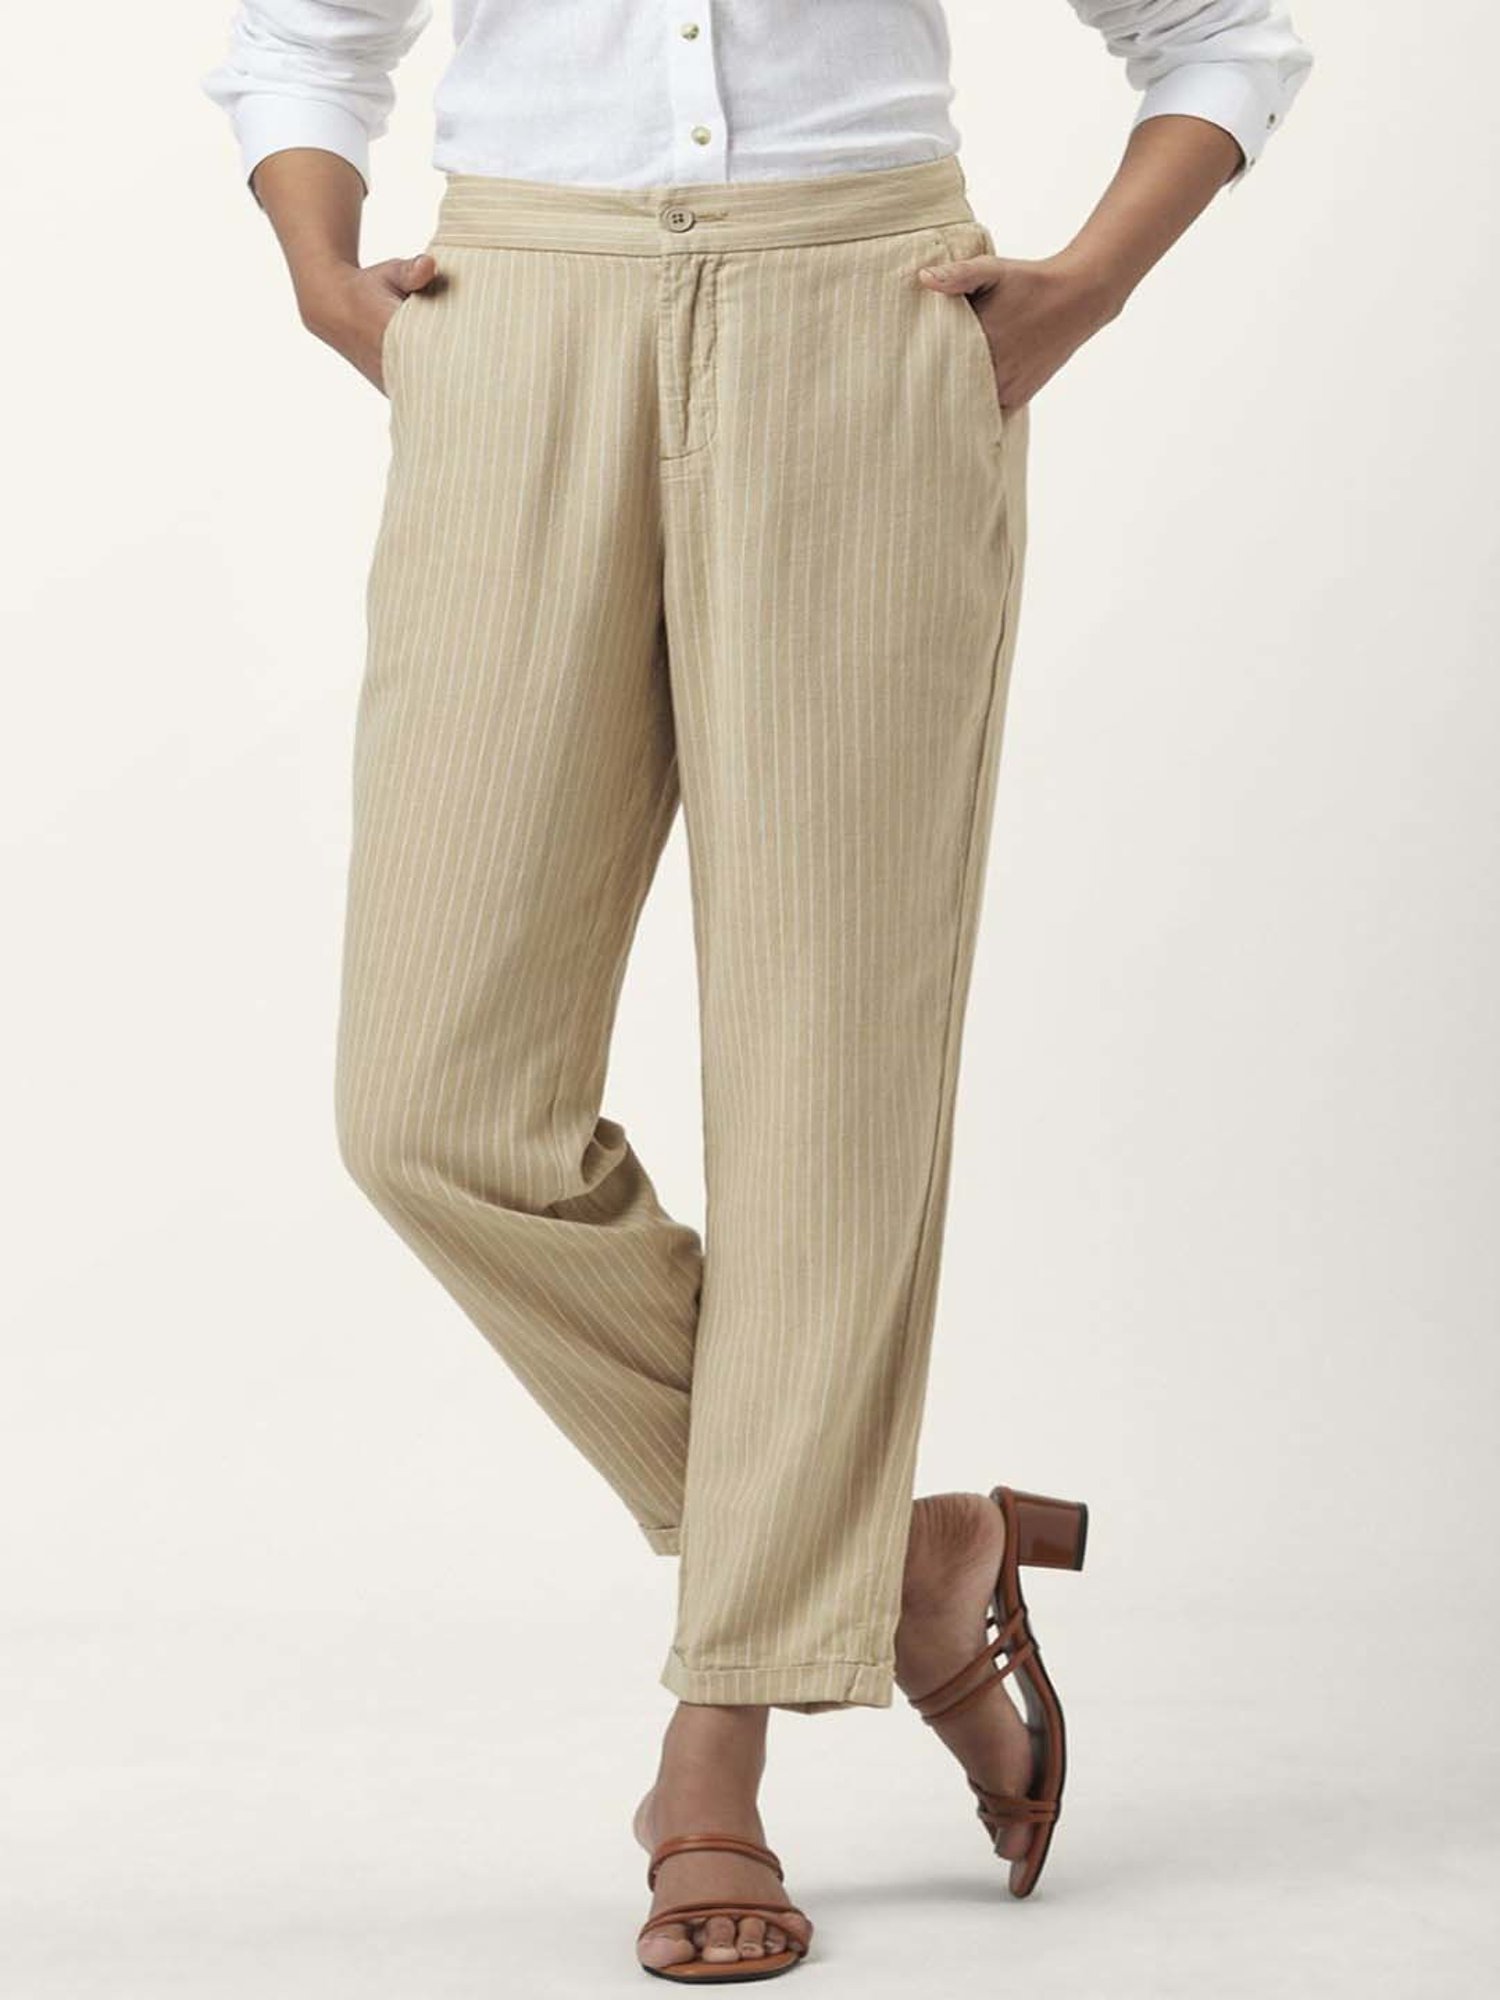 Annabelle by Pantaloons Slim Fit Women Beige Trousers  Buy Annabelle by  Pantaloons Slim Fit Women Beige Trousers Online at Best Prices in India   Shopsyin